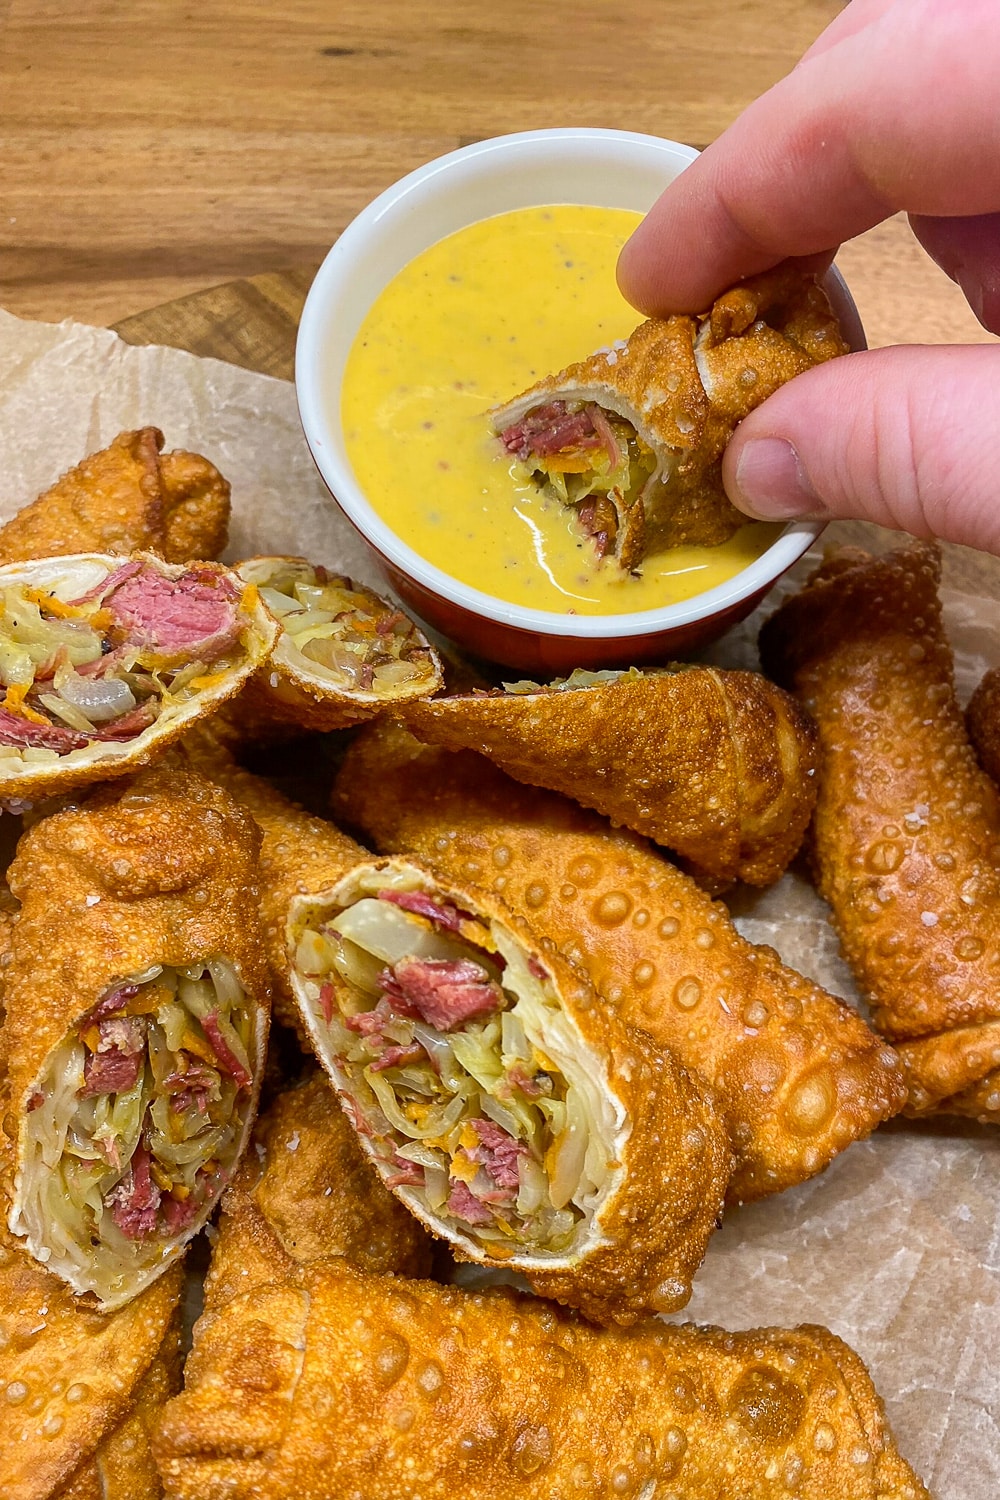 Dipping the Corned Beef & Cabbage Egg Rolls into the sauce